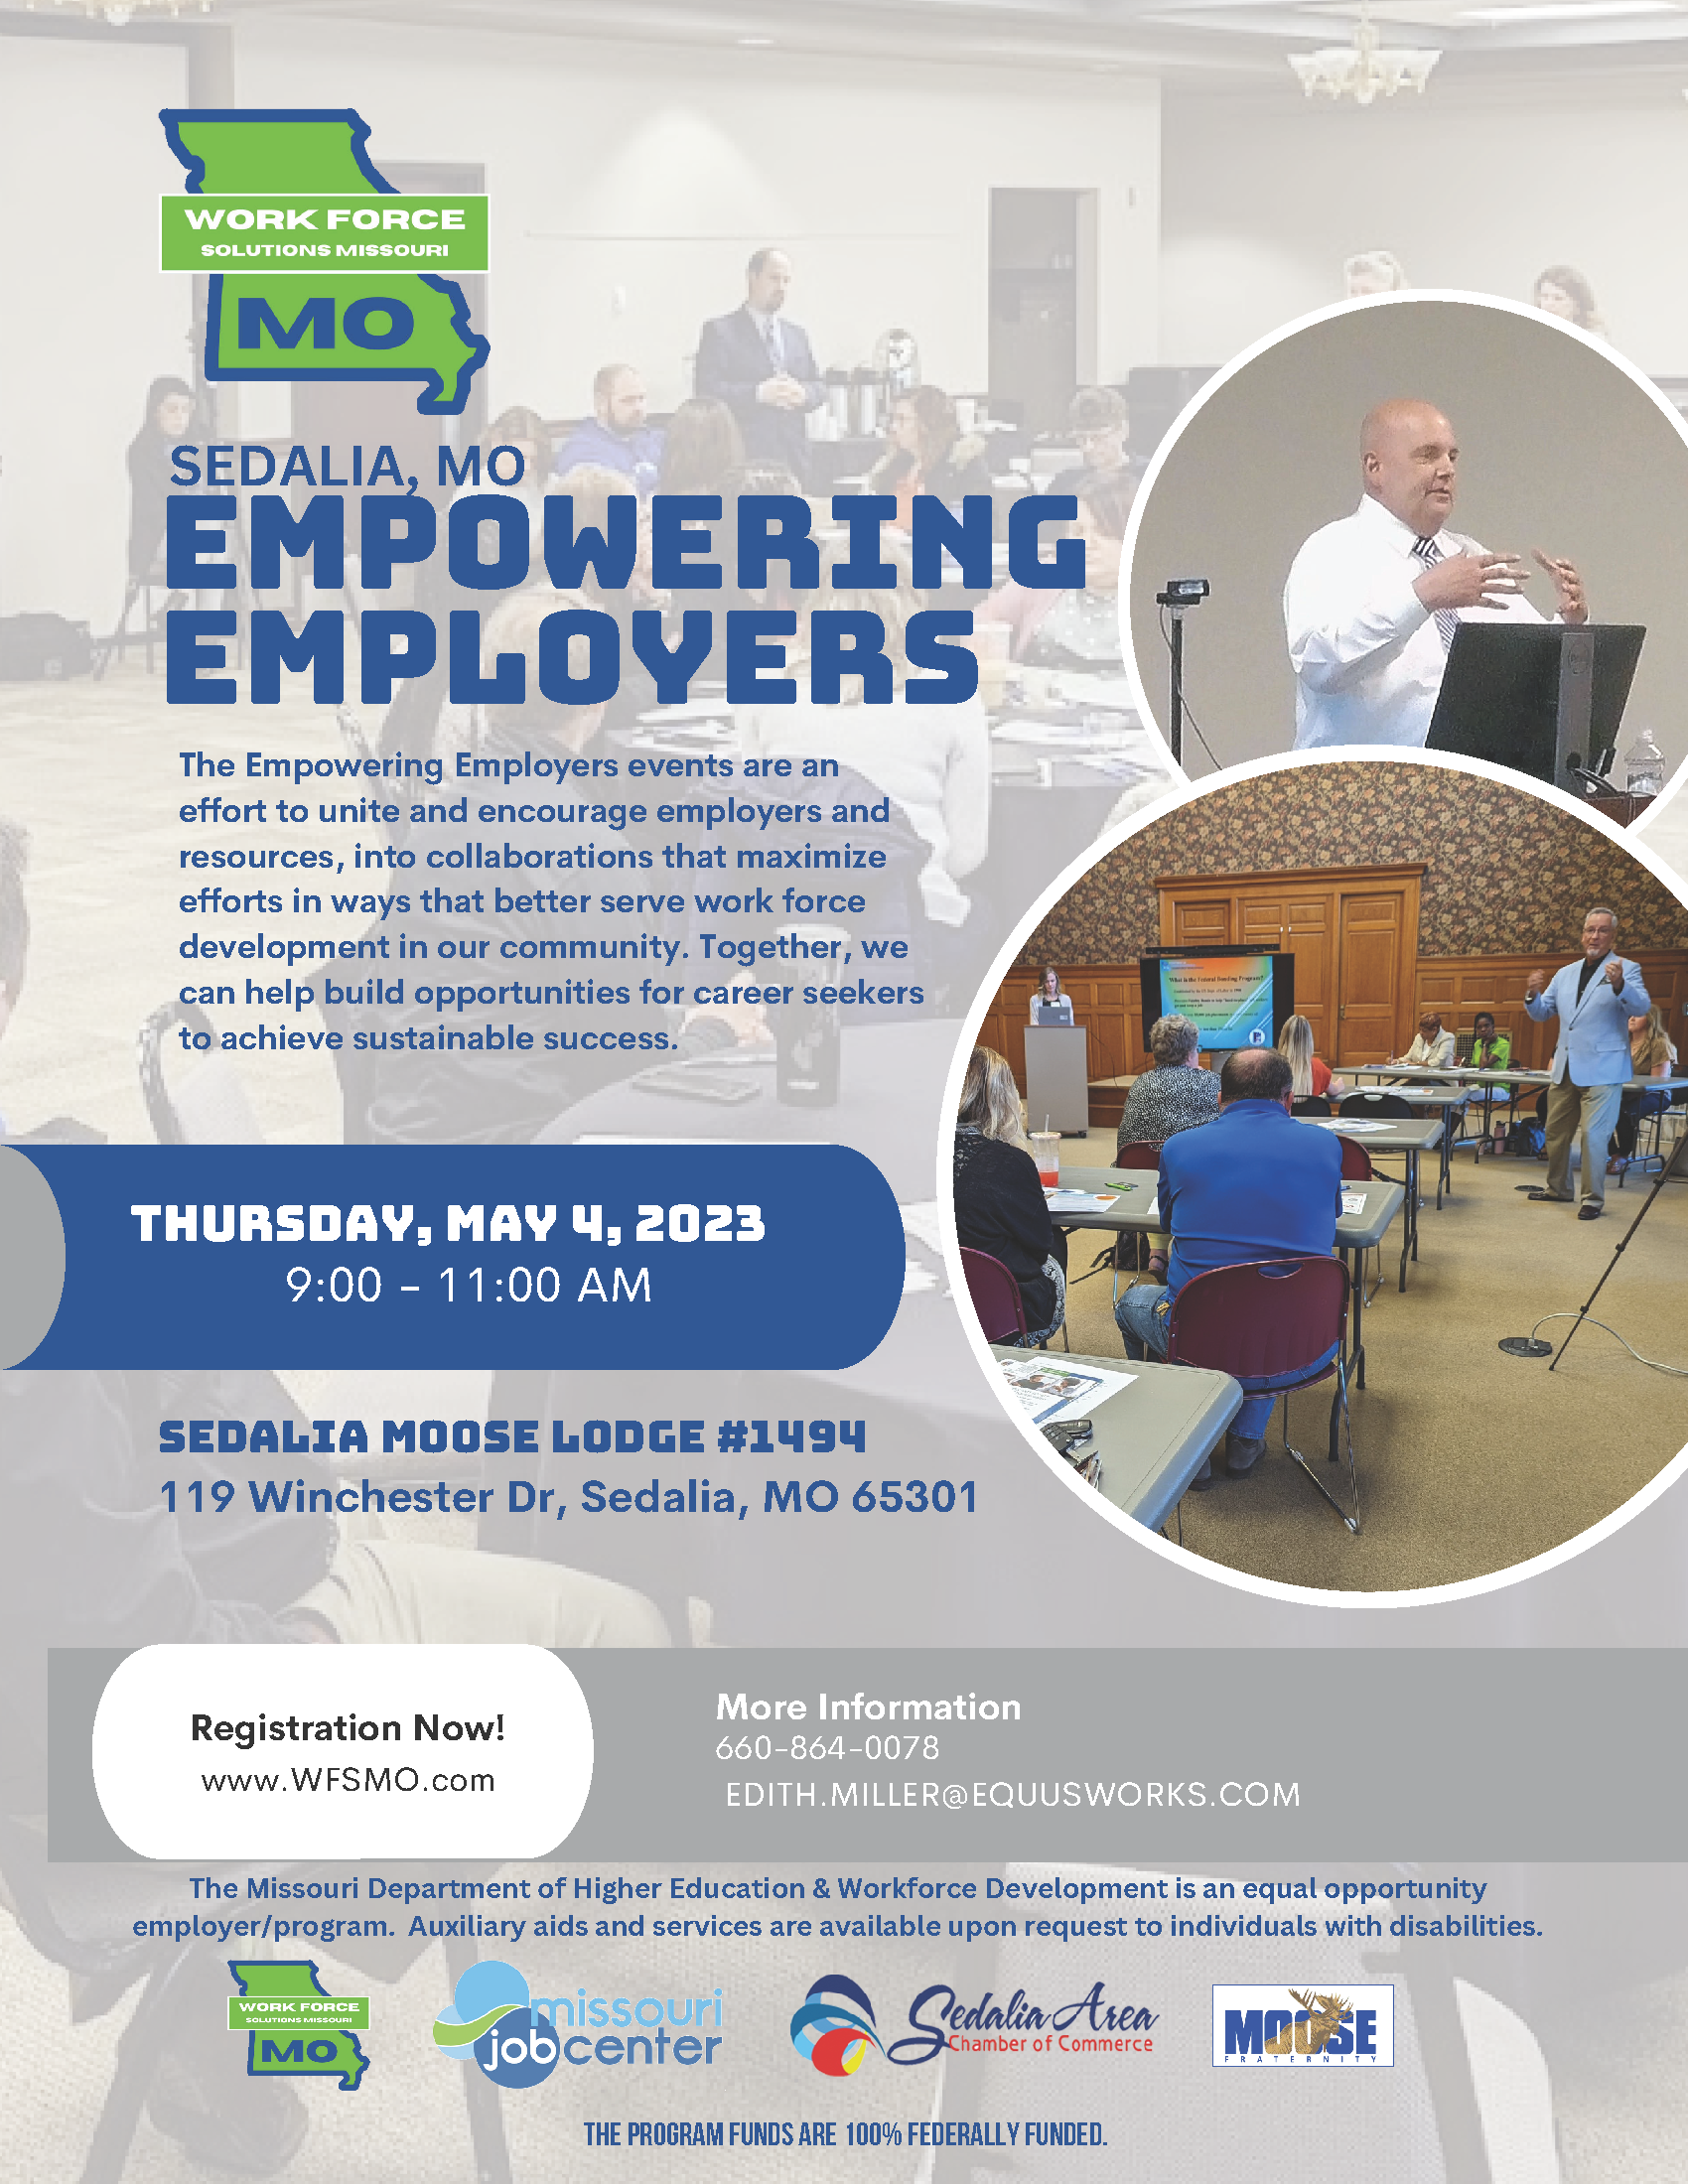 EMPOWERING EMPLOYERS The Empowering Employers events are an effort to unite and encourage employers and resources, into collaborations that maximize efforts in ways that better serve work force development in our community. Together, we can  help build opportunities for career seekers to achieve sustainable success. Thursday May 4, 2023 from 9am to 11am at the Sedalia Moose Lodge #1494 at 119 Winchester Dr. in Sedalia, MO. Call 660-864-0078 or visit WFSMO.com for more info,